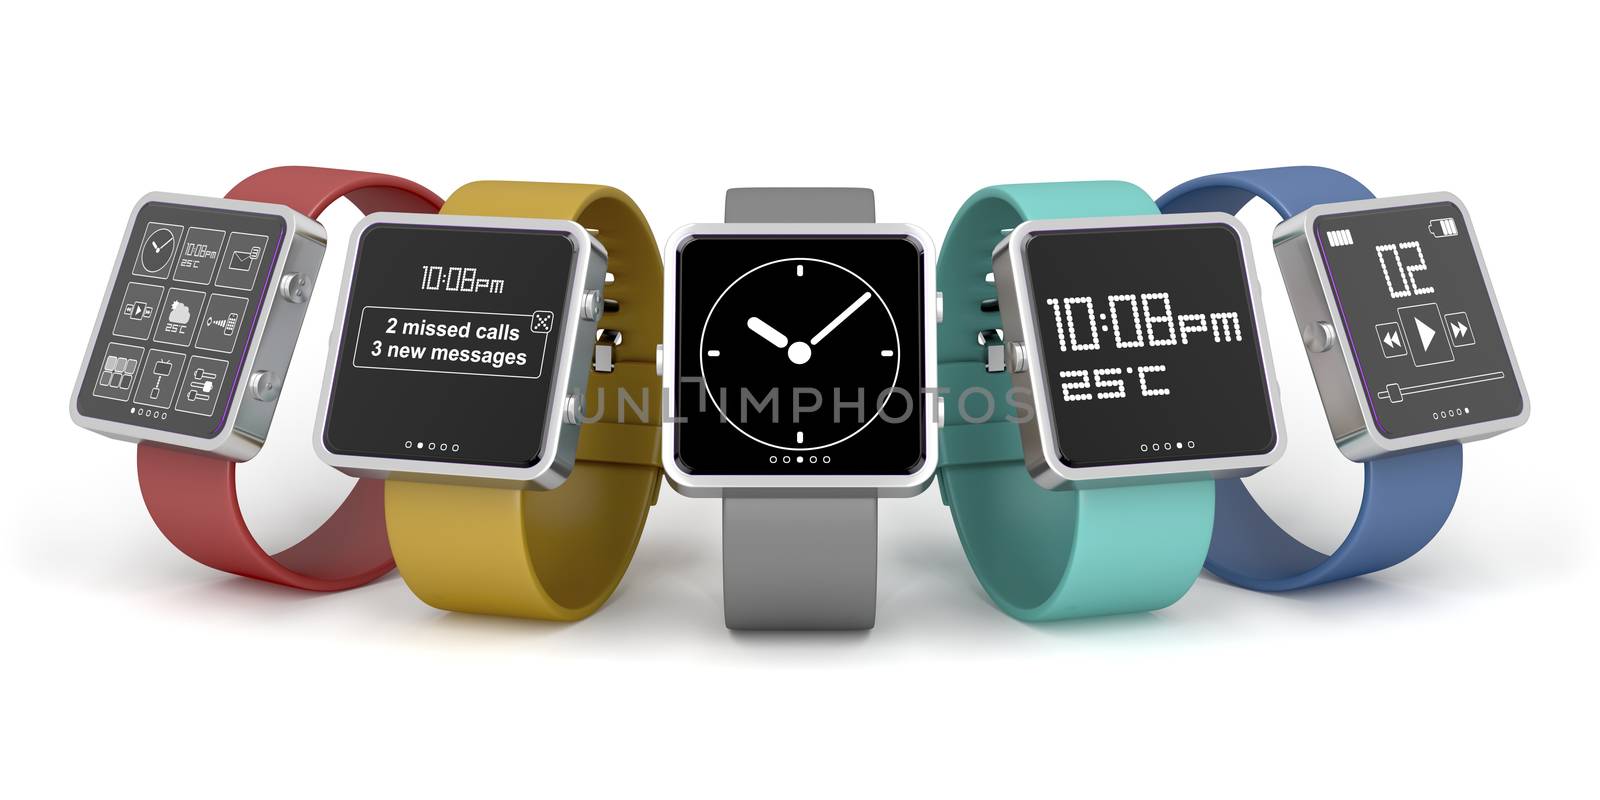 Five smartwatches with different interfaces and colors